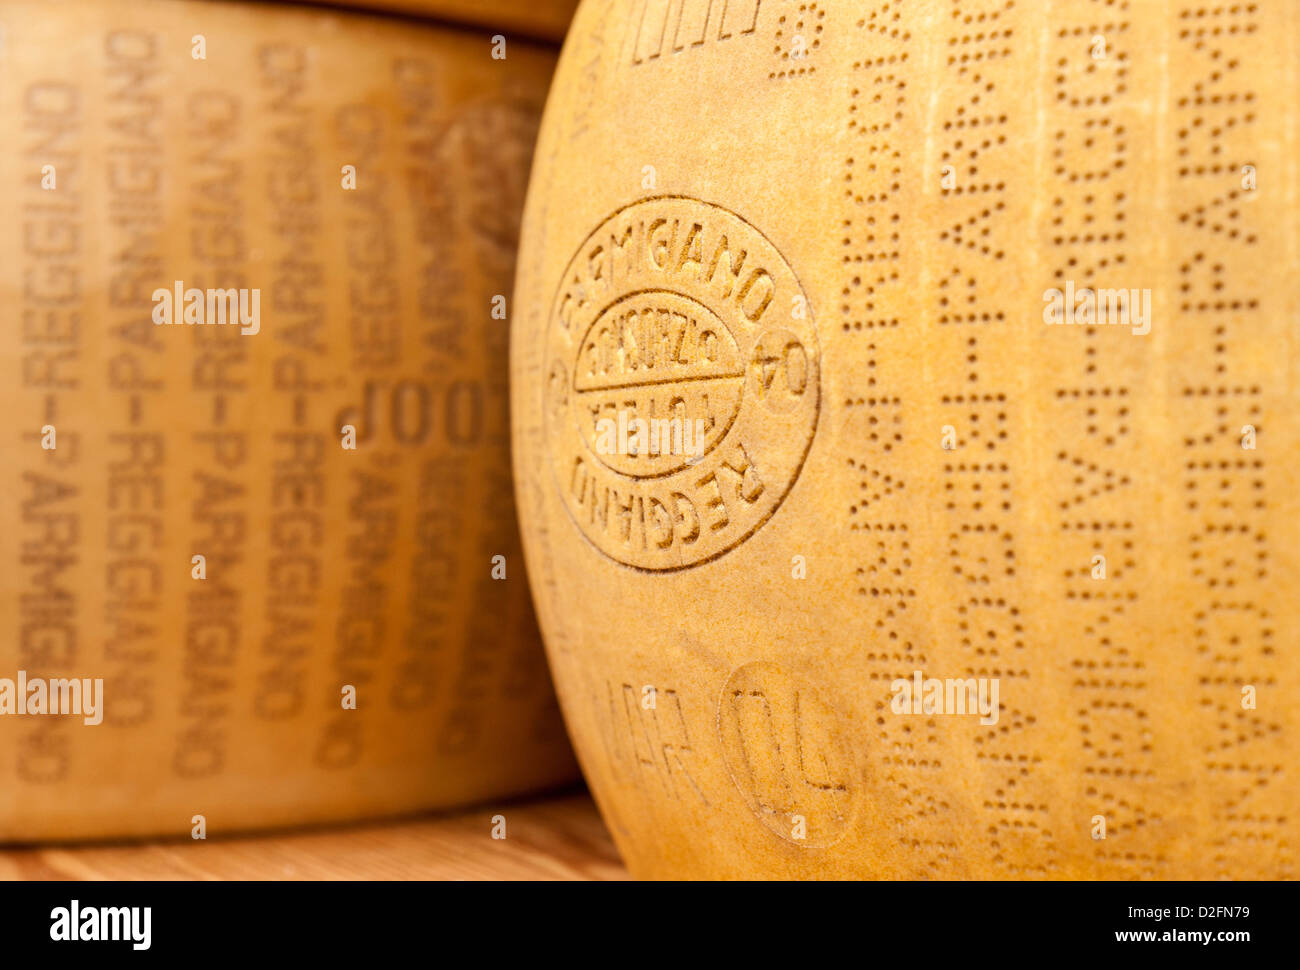 Close up of large wheels of Parmesan Cheese Stock Photo